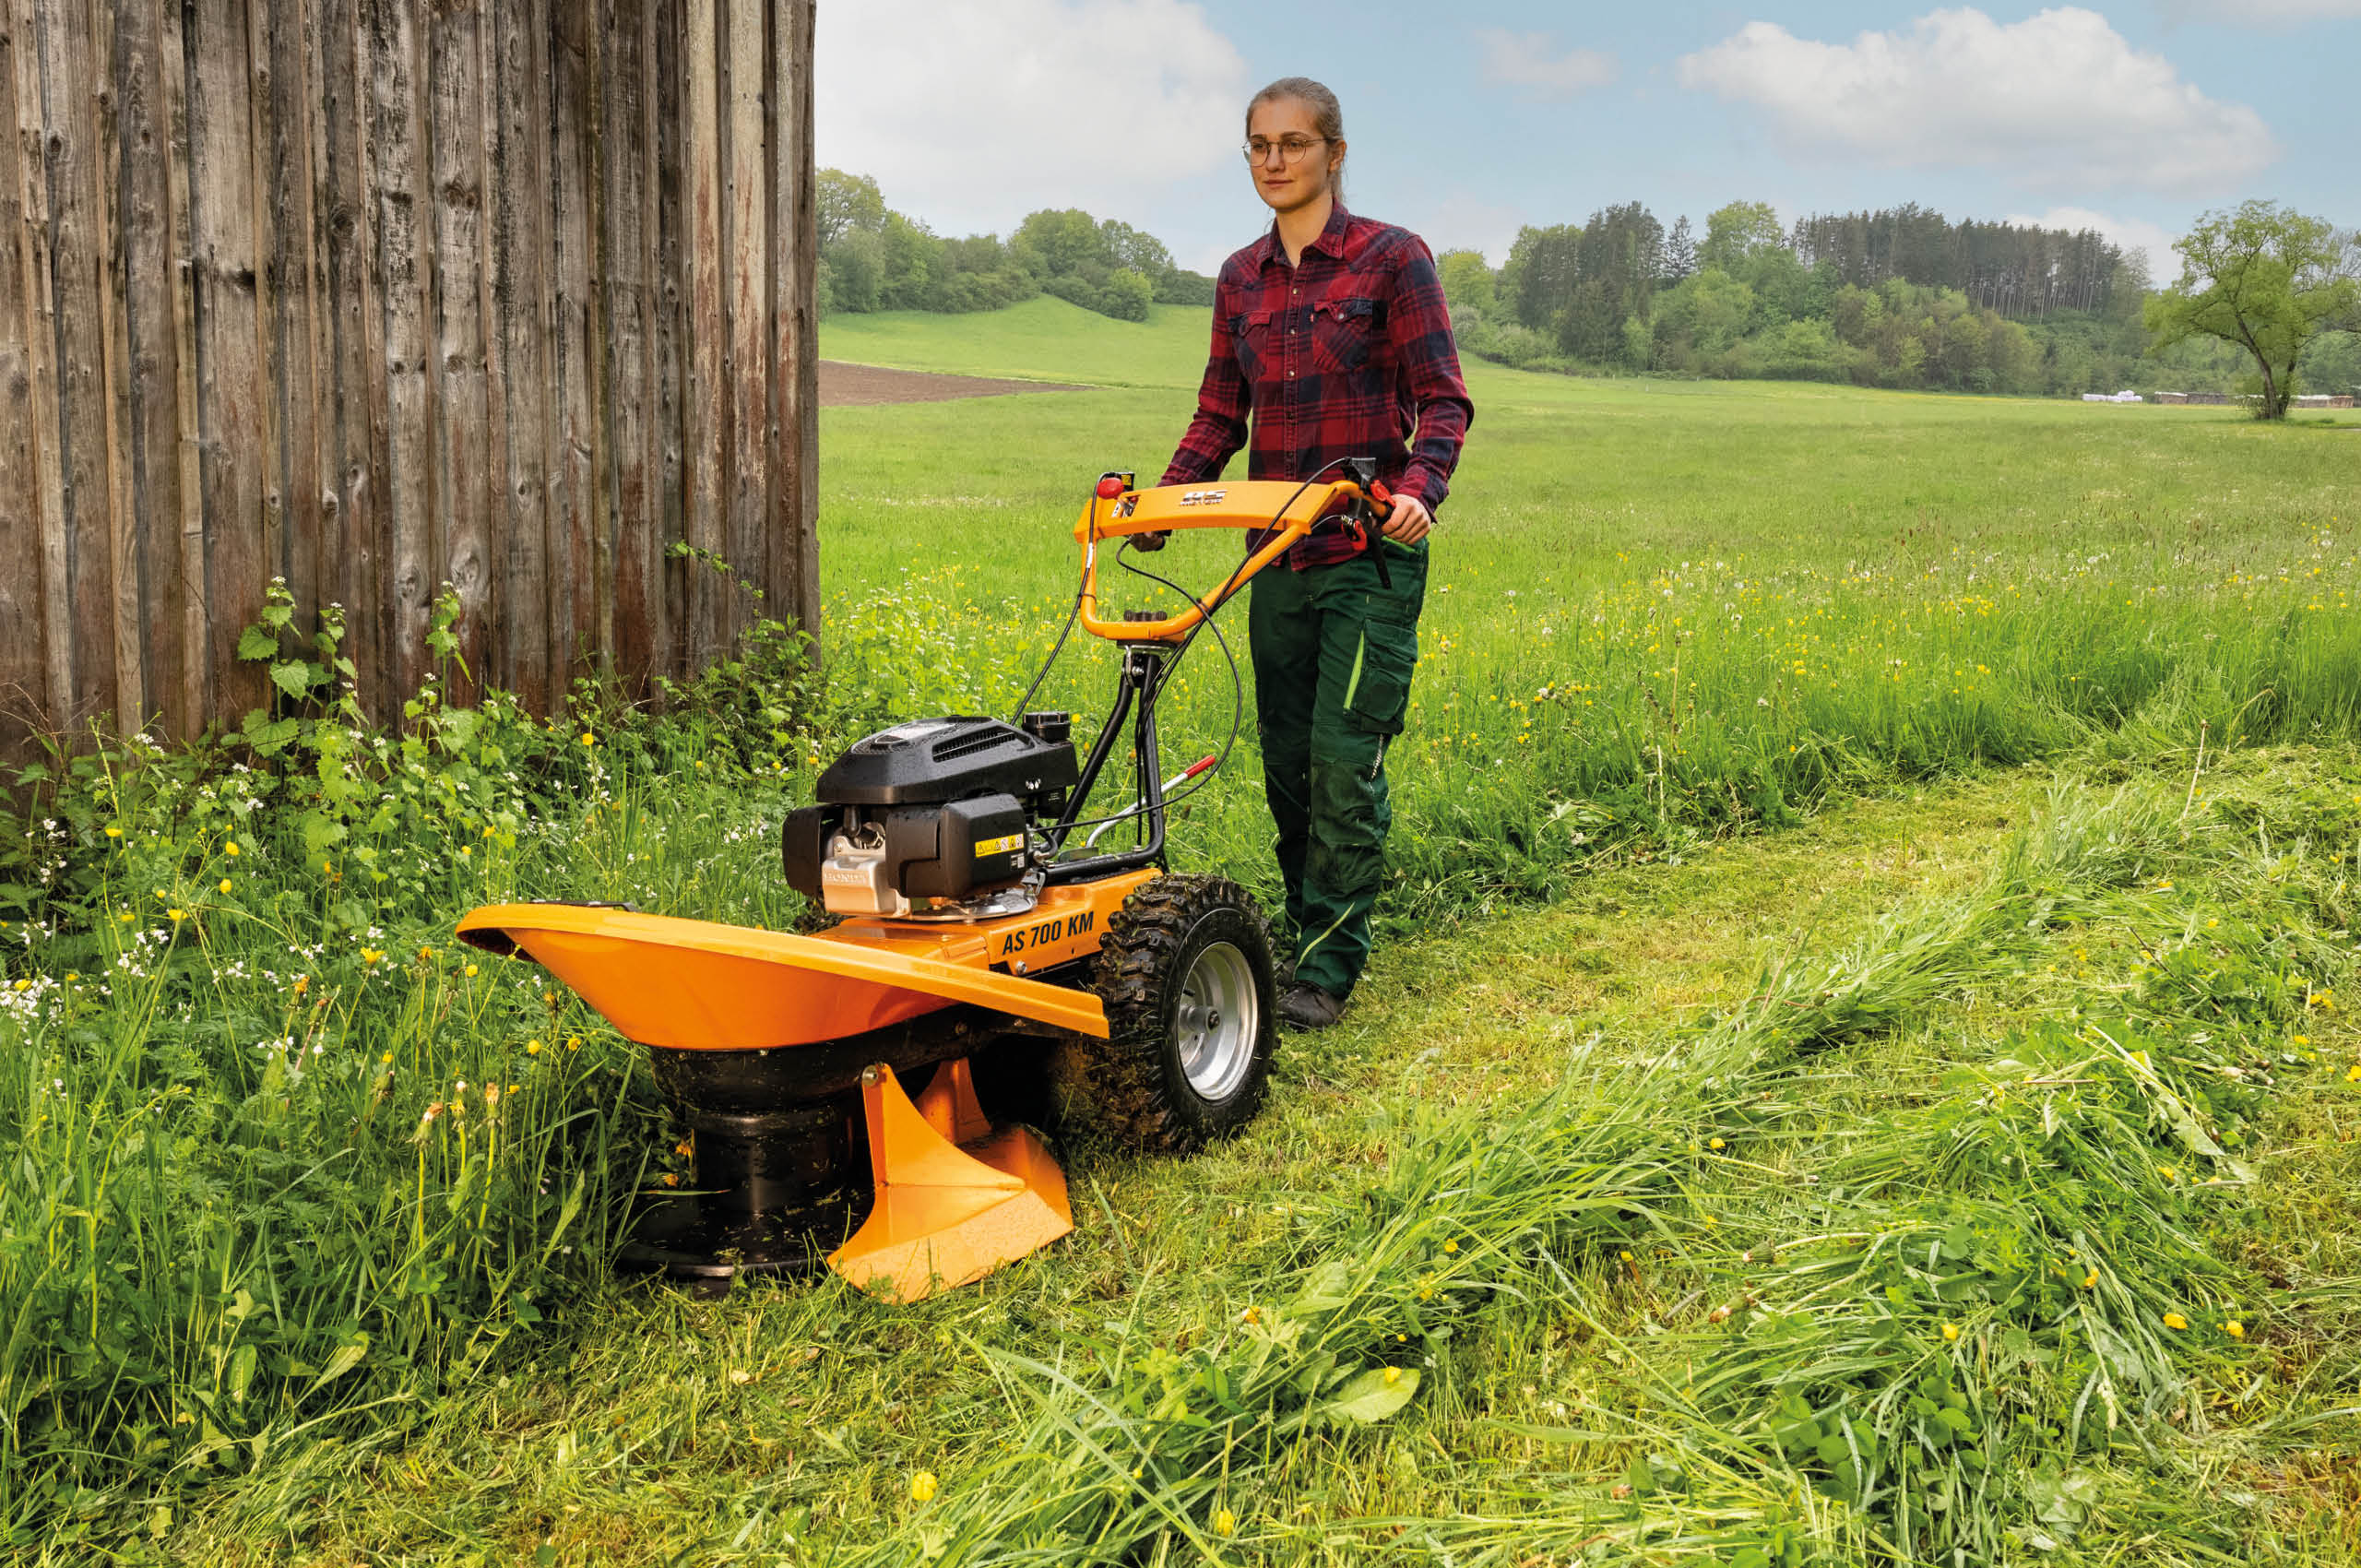 Rotary Cutter « Quality Cutting Equipment to Make Mowing Easier